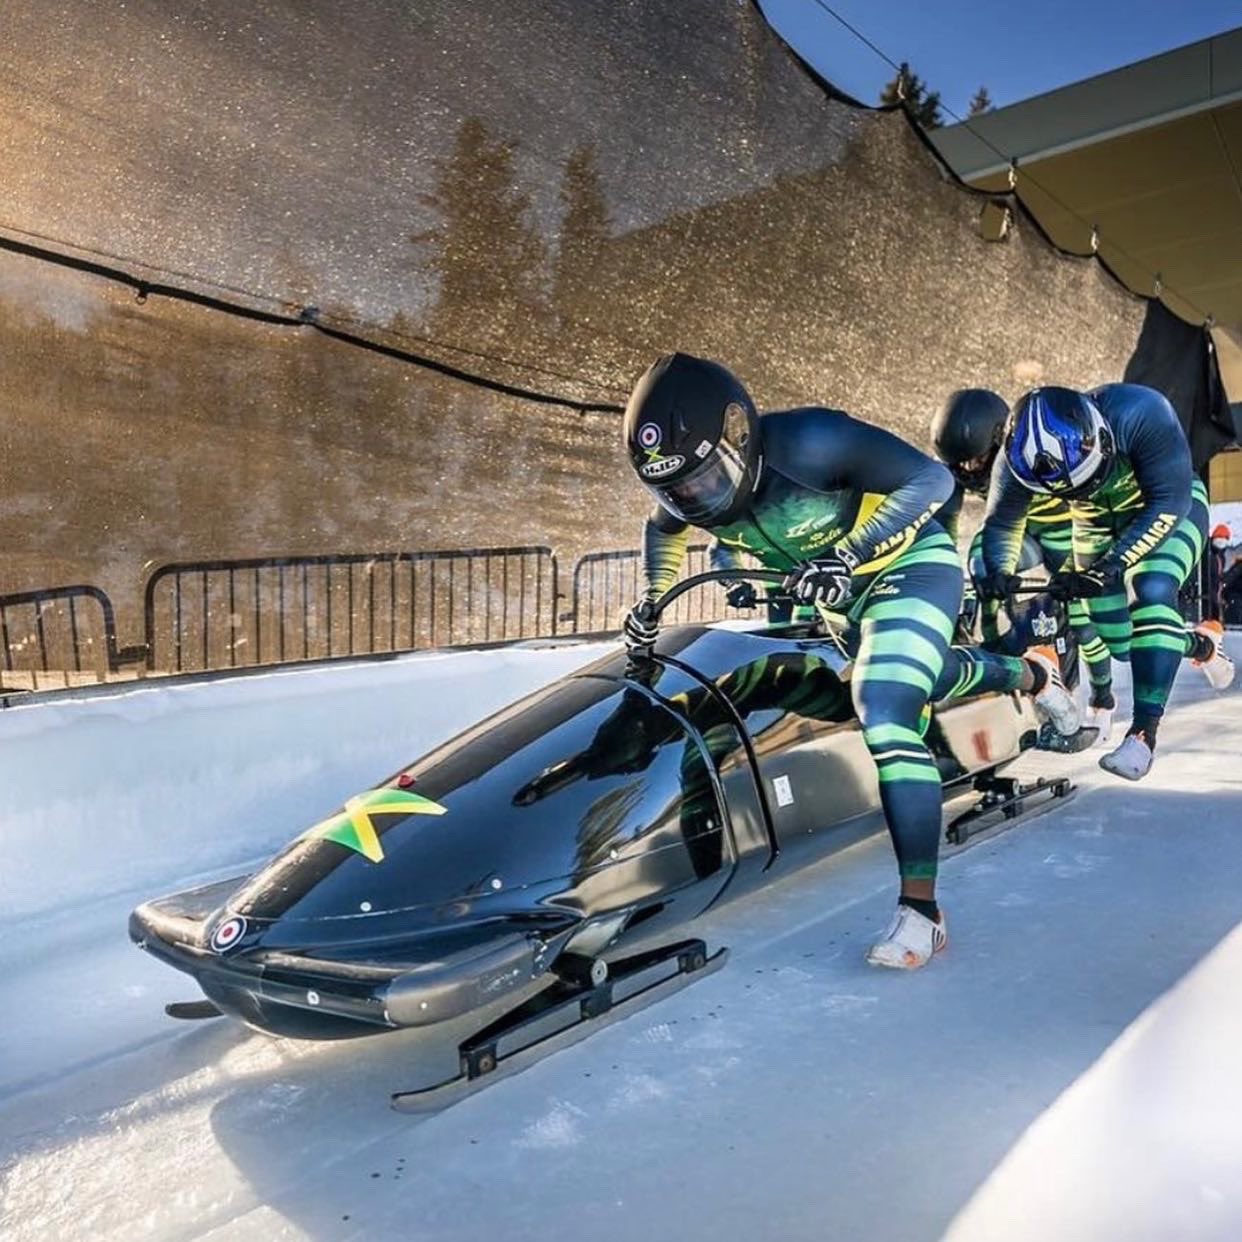 Olympic Games 2022: Rasta Rocket, the movie that popularized bobsleigh

